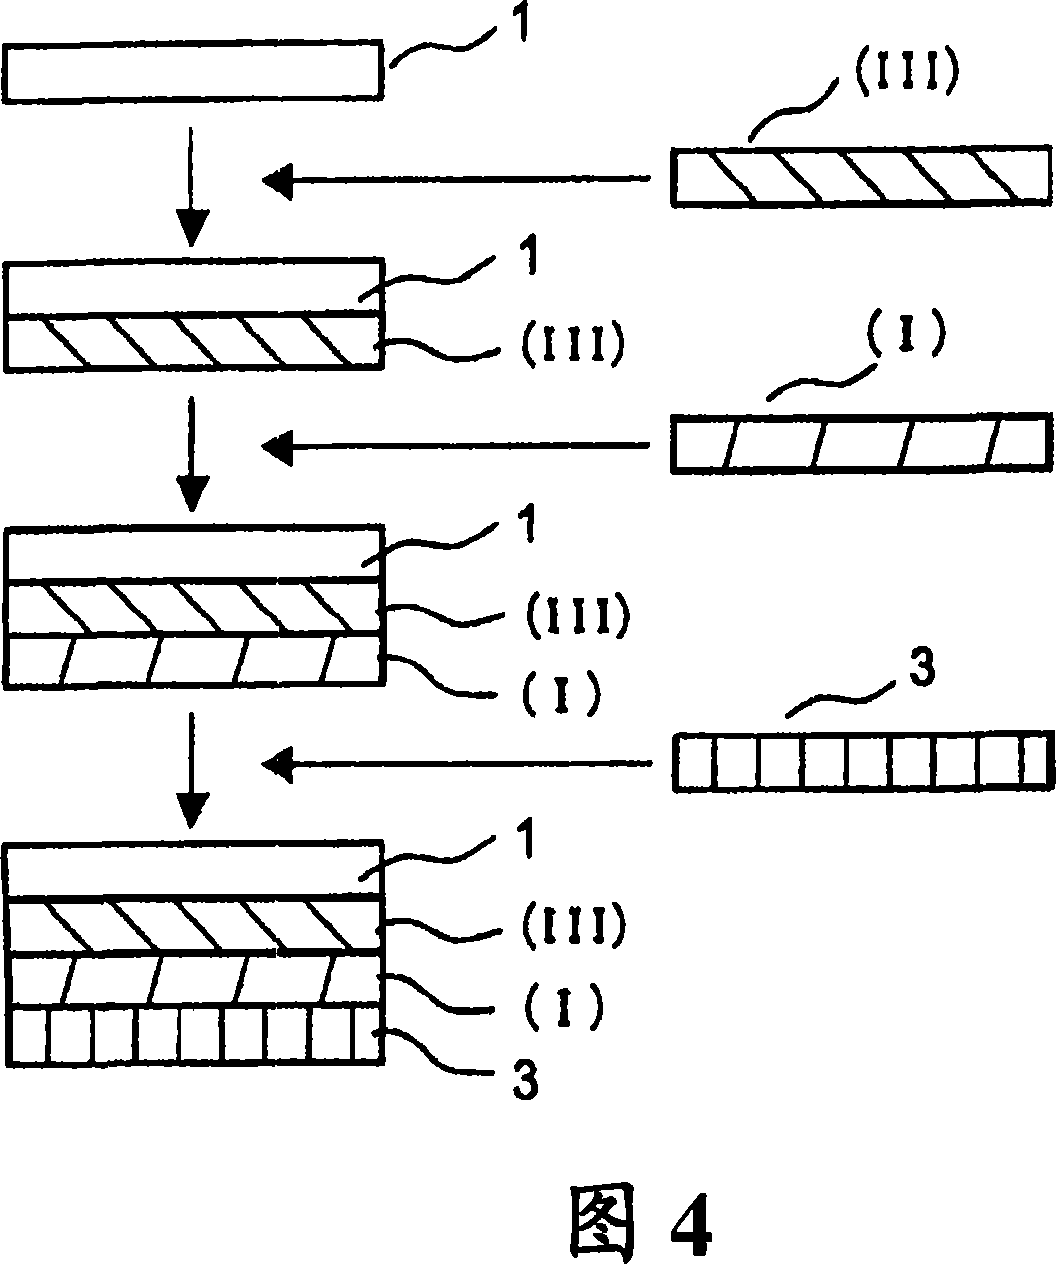 Electromagnetic-wave-shielding adhesive film, process for producing the same, and method of shielding adherend from electromagnetic wave